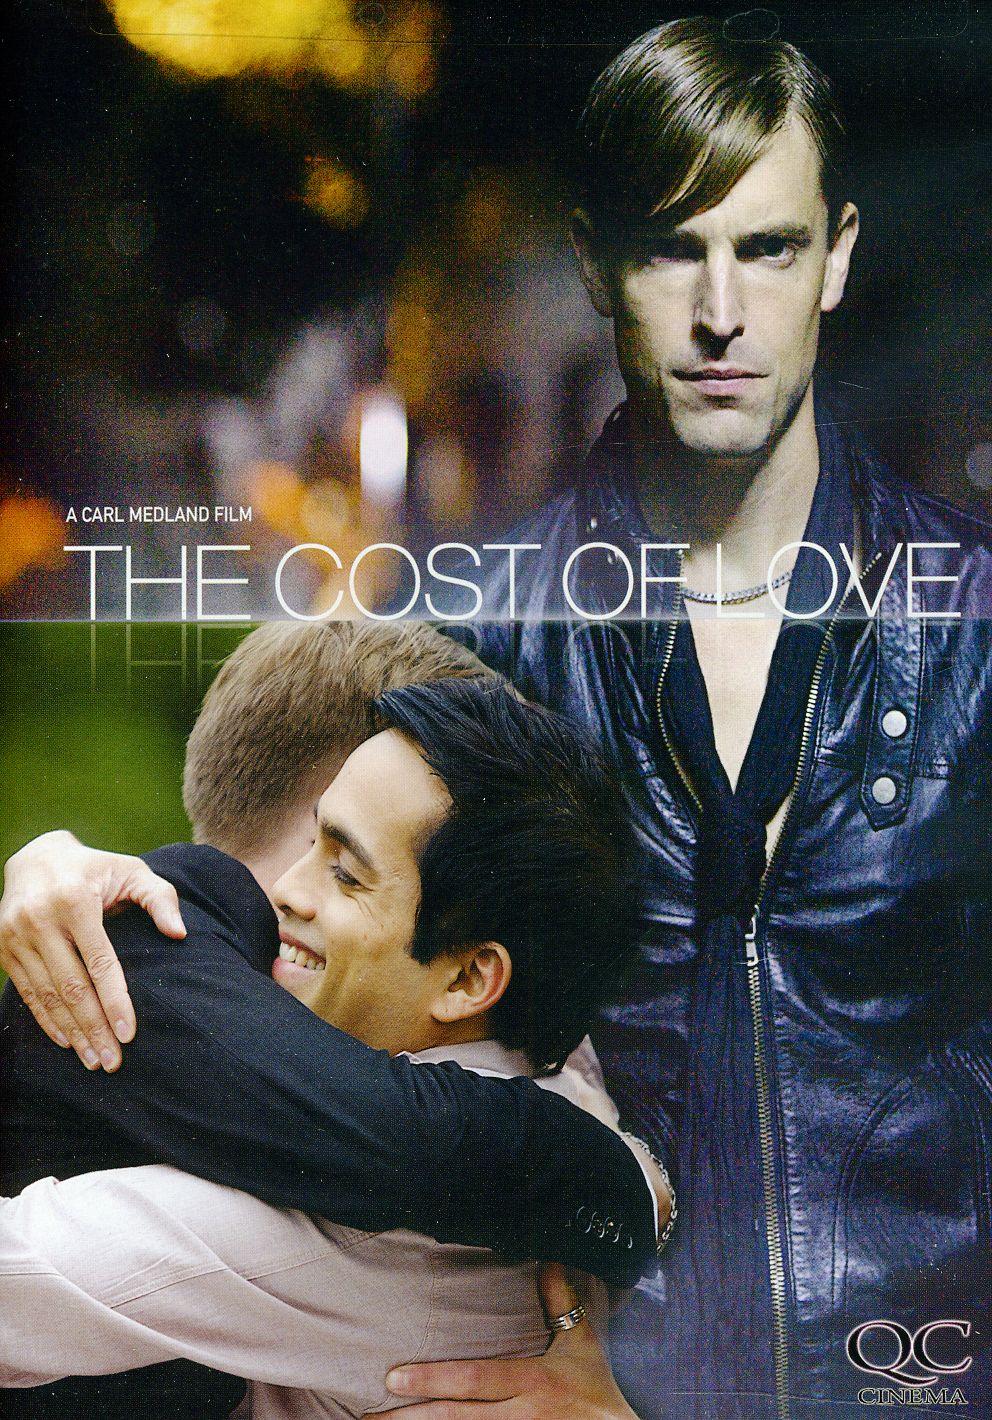 COST OF LOVE